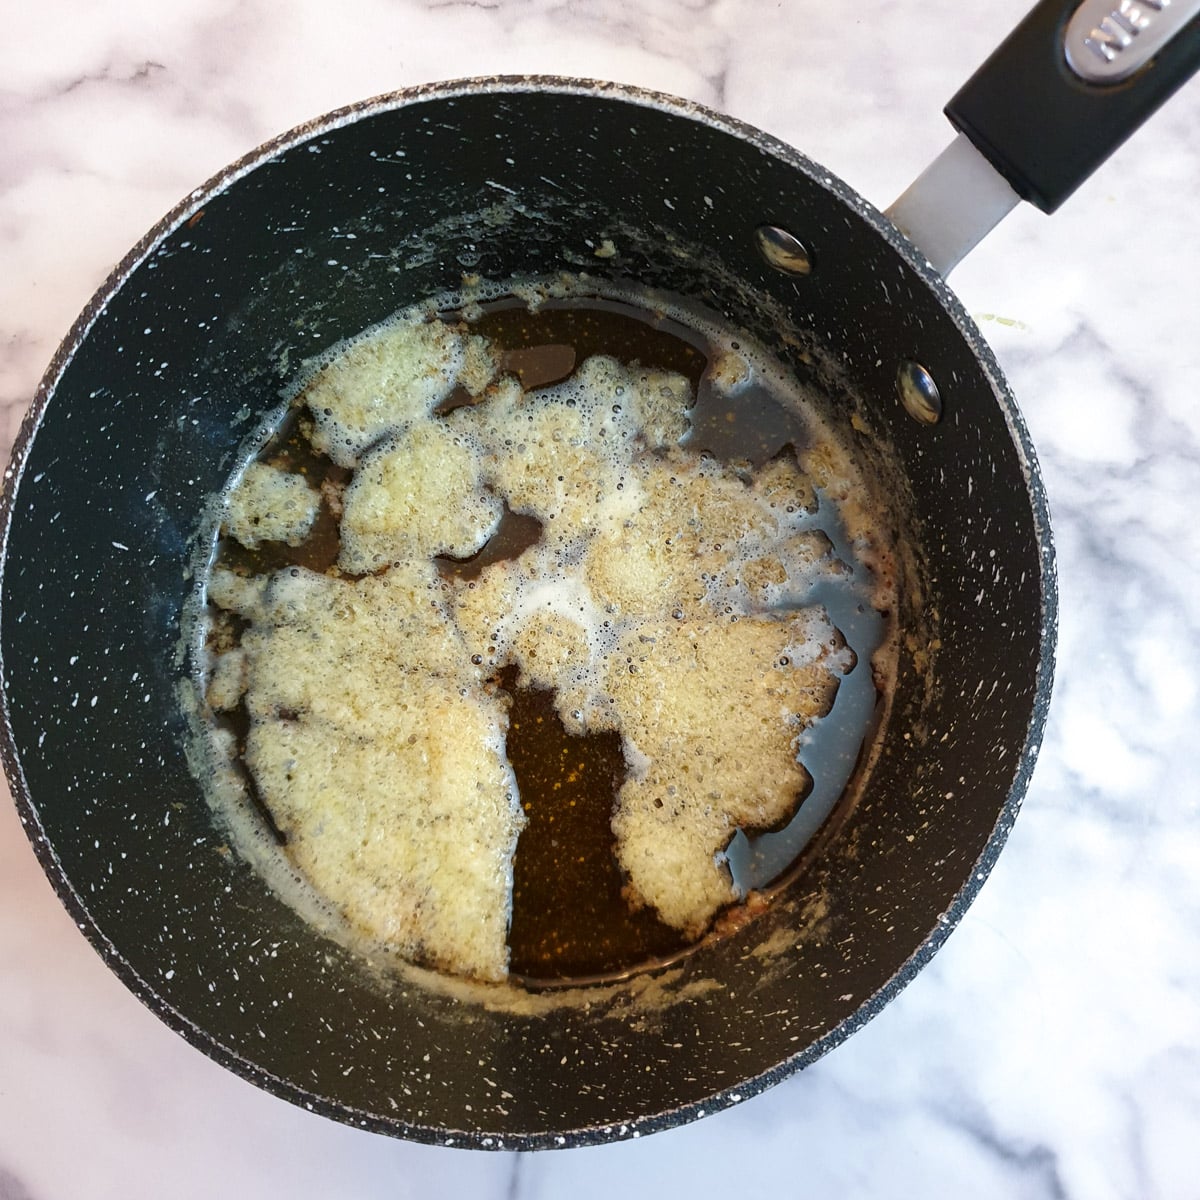 Separated milk solids floating of top of melted butter in a saucepan.